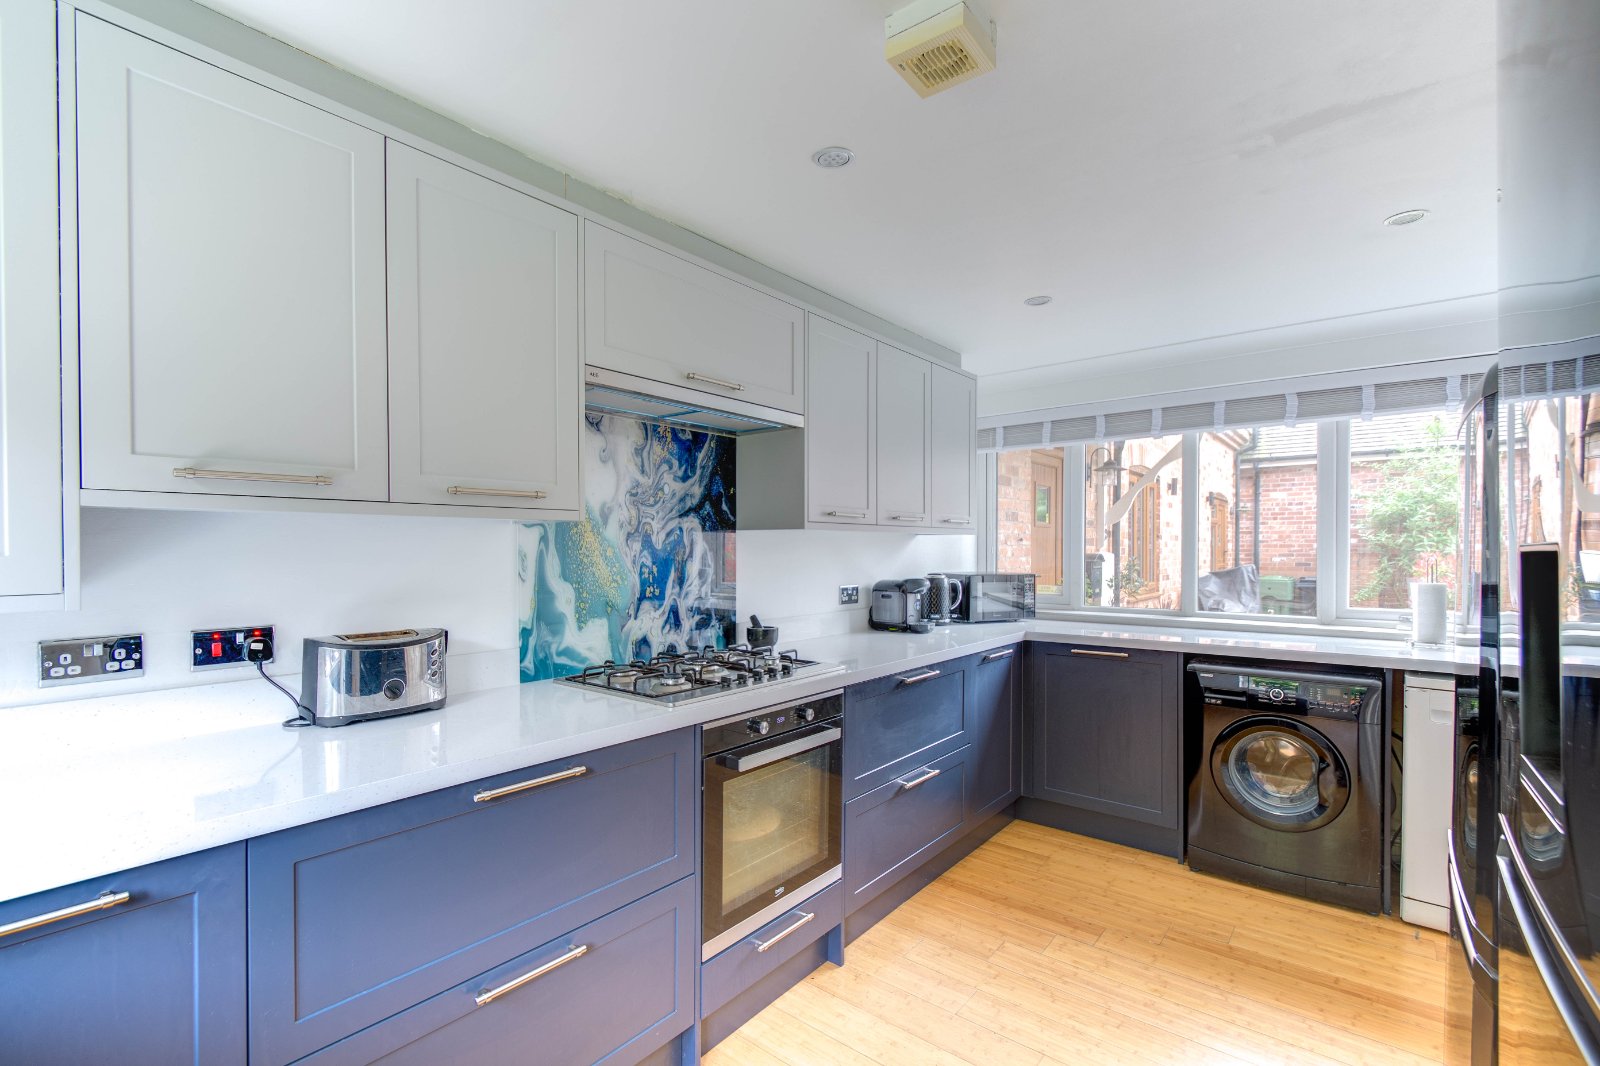 4 bed  for sale in Linthurst Road, Barnt Green 3